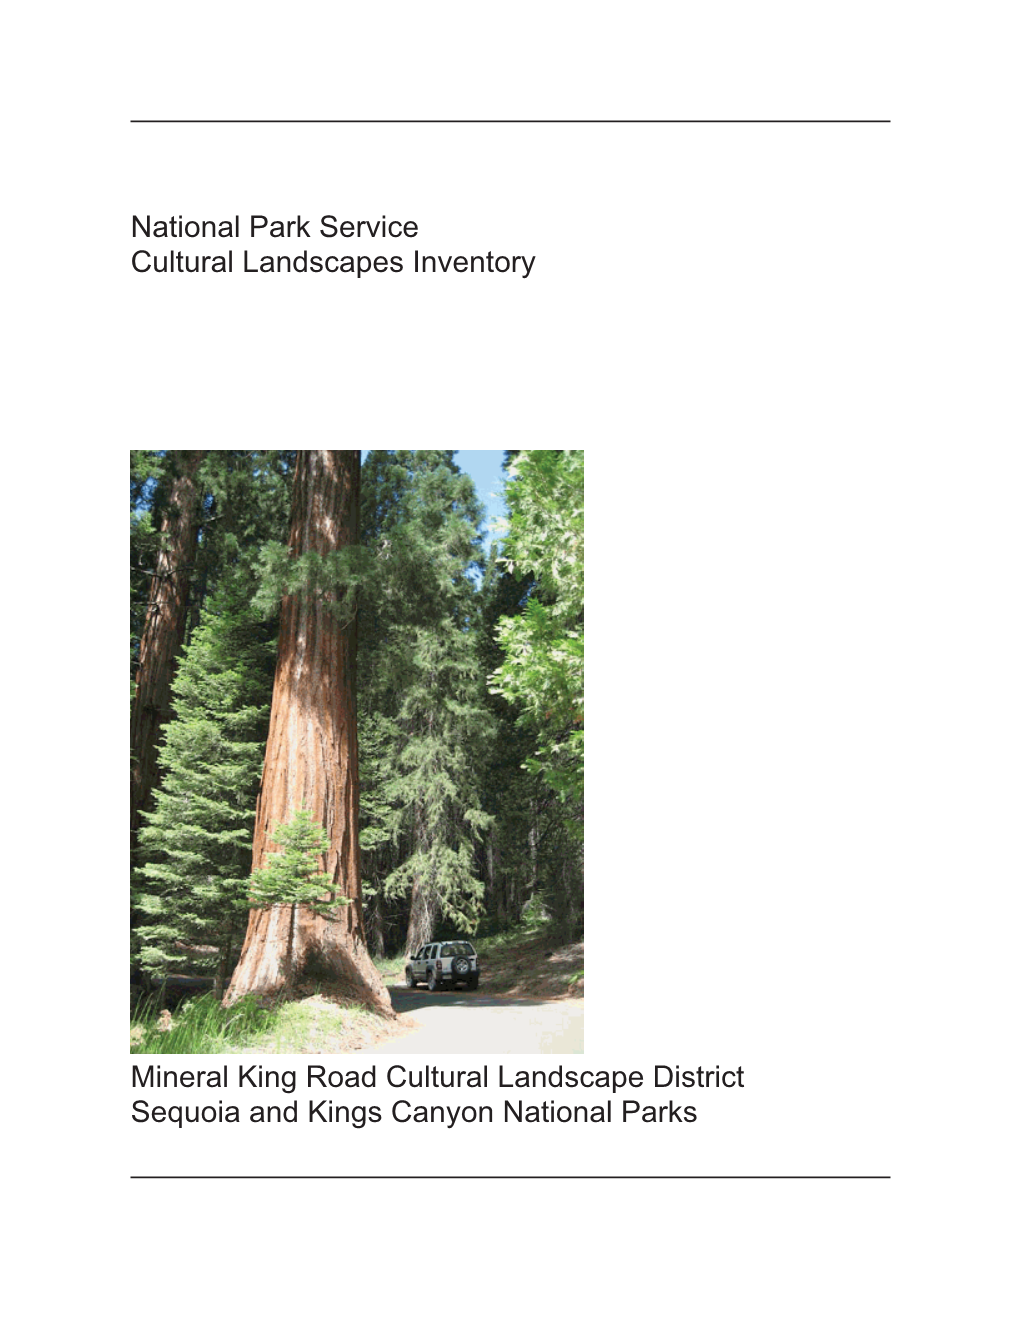 Mineral King Road Cultural Landscape District Sequoia and Kings Canyon National Parks "F" • National Park Serv1ee .E.A Pa Cl IC West Region U.S